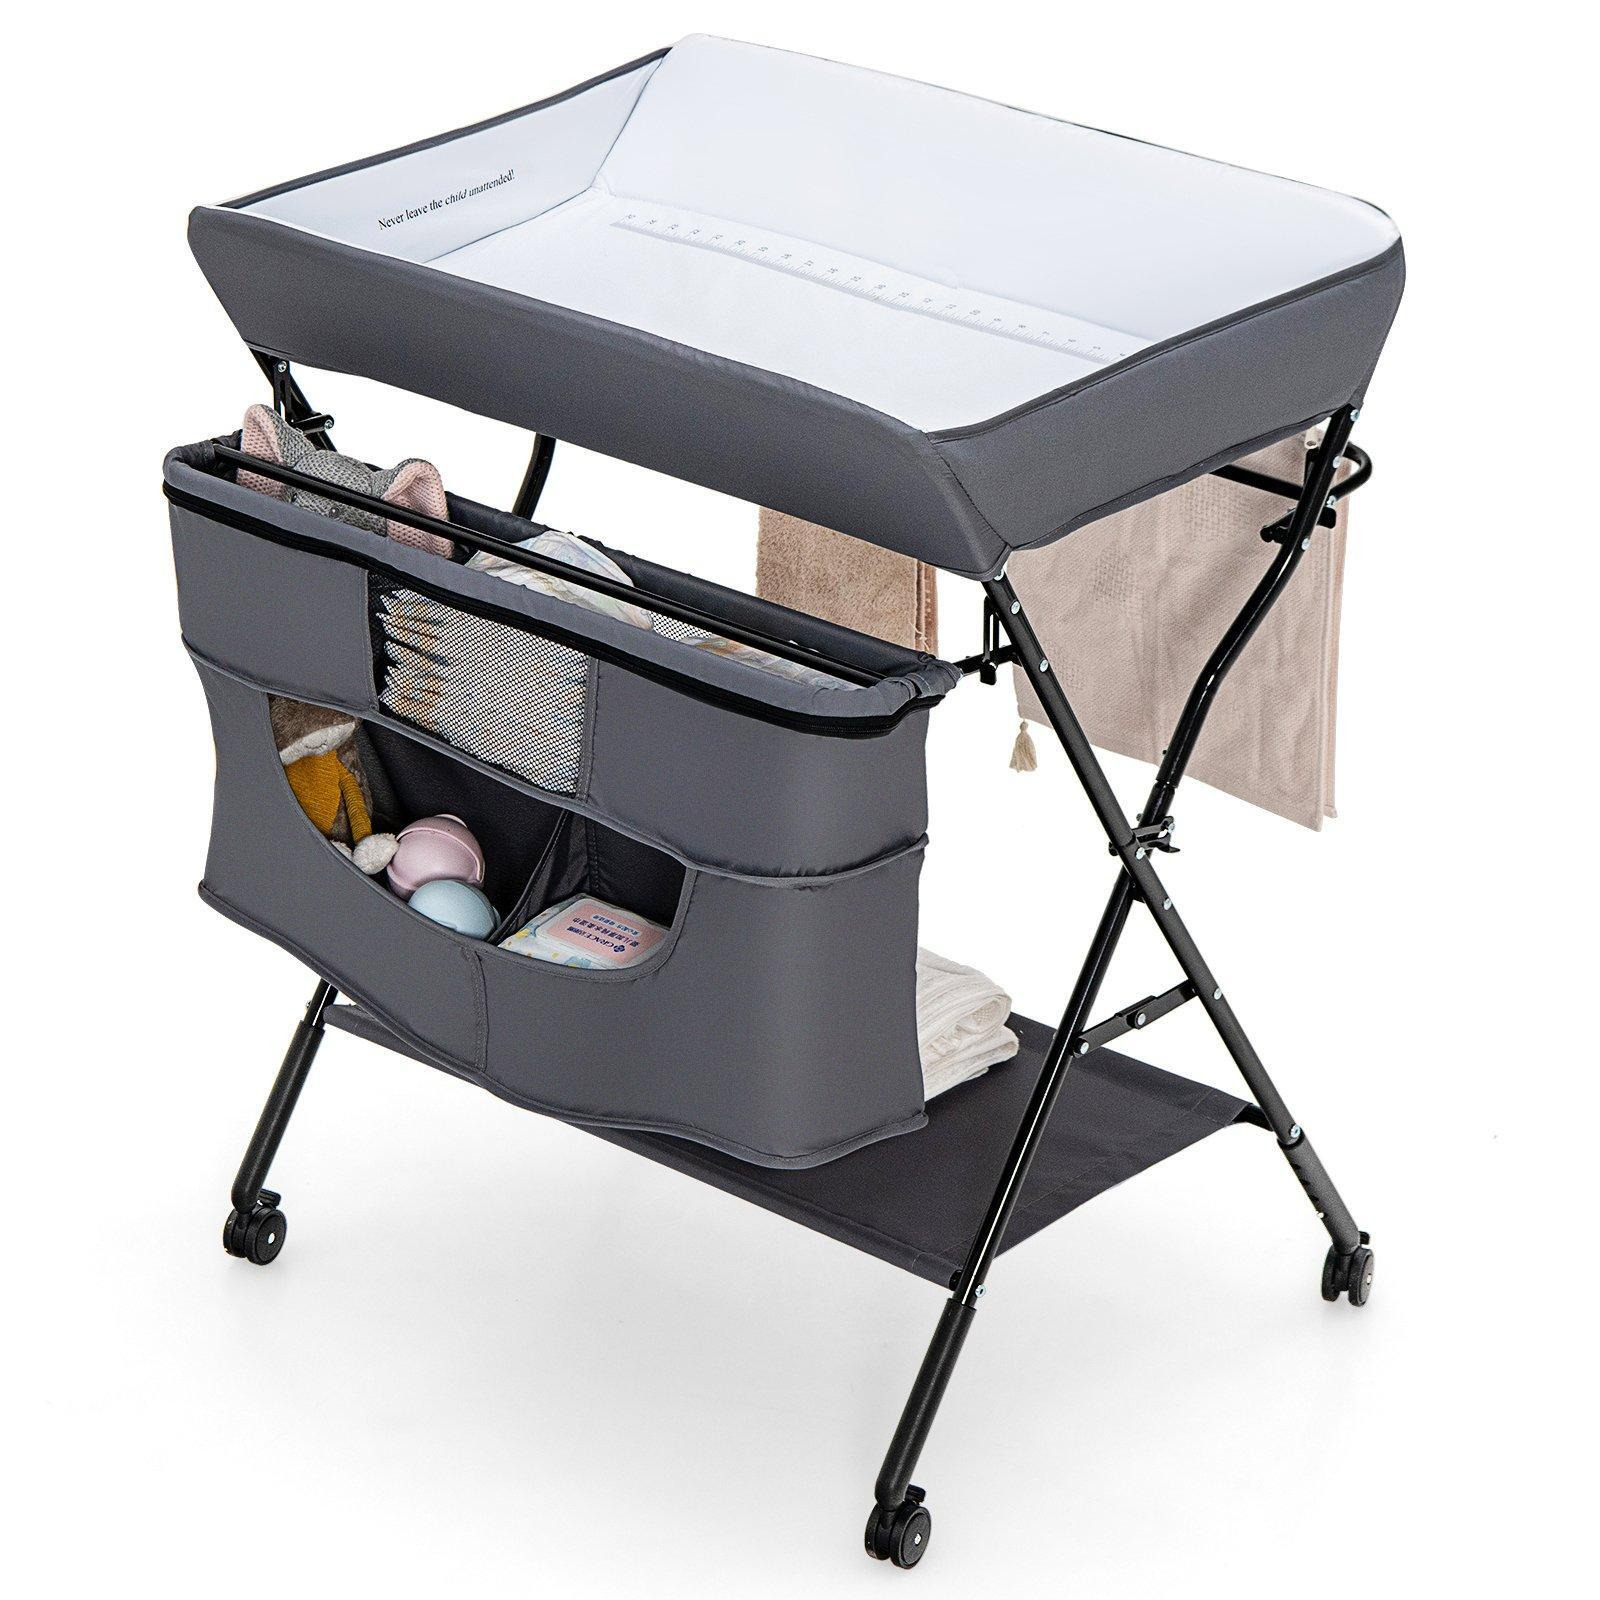 4-in-1 Baby Folding Changing Table Newborn Nursery Organizer Infant Care Station - image 1